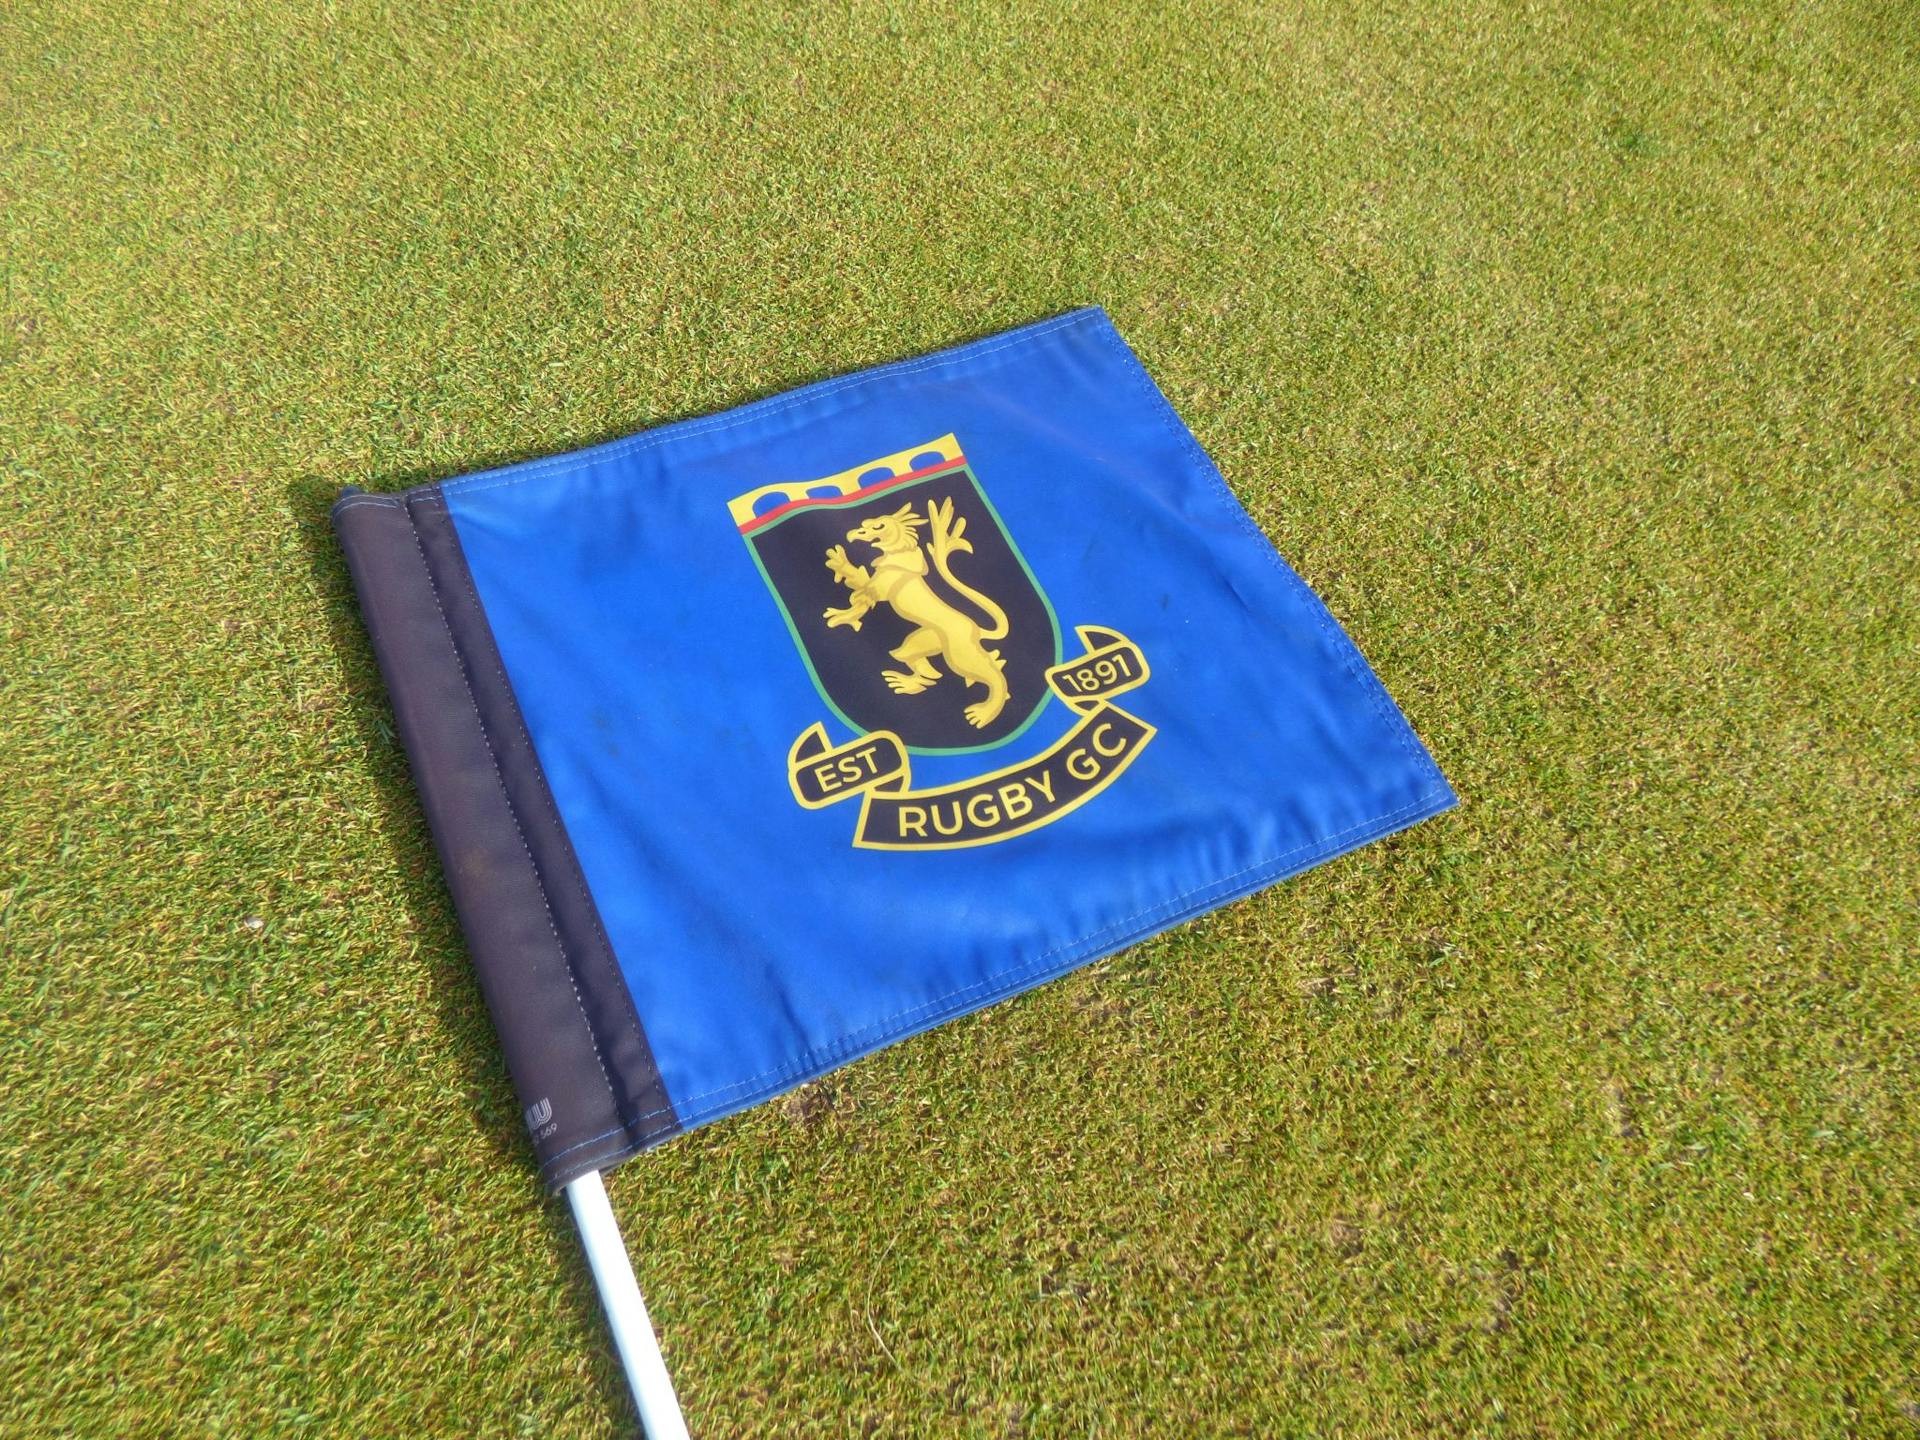 Mr. Morris Davies and Mr. Sedgewick formed the club over 130 years ago. Source: Rugby Golf Club 